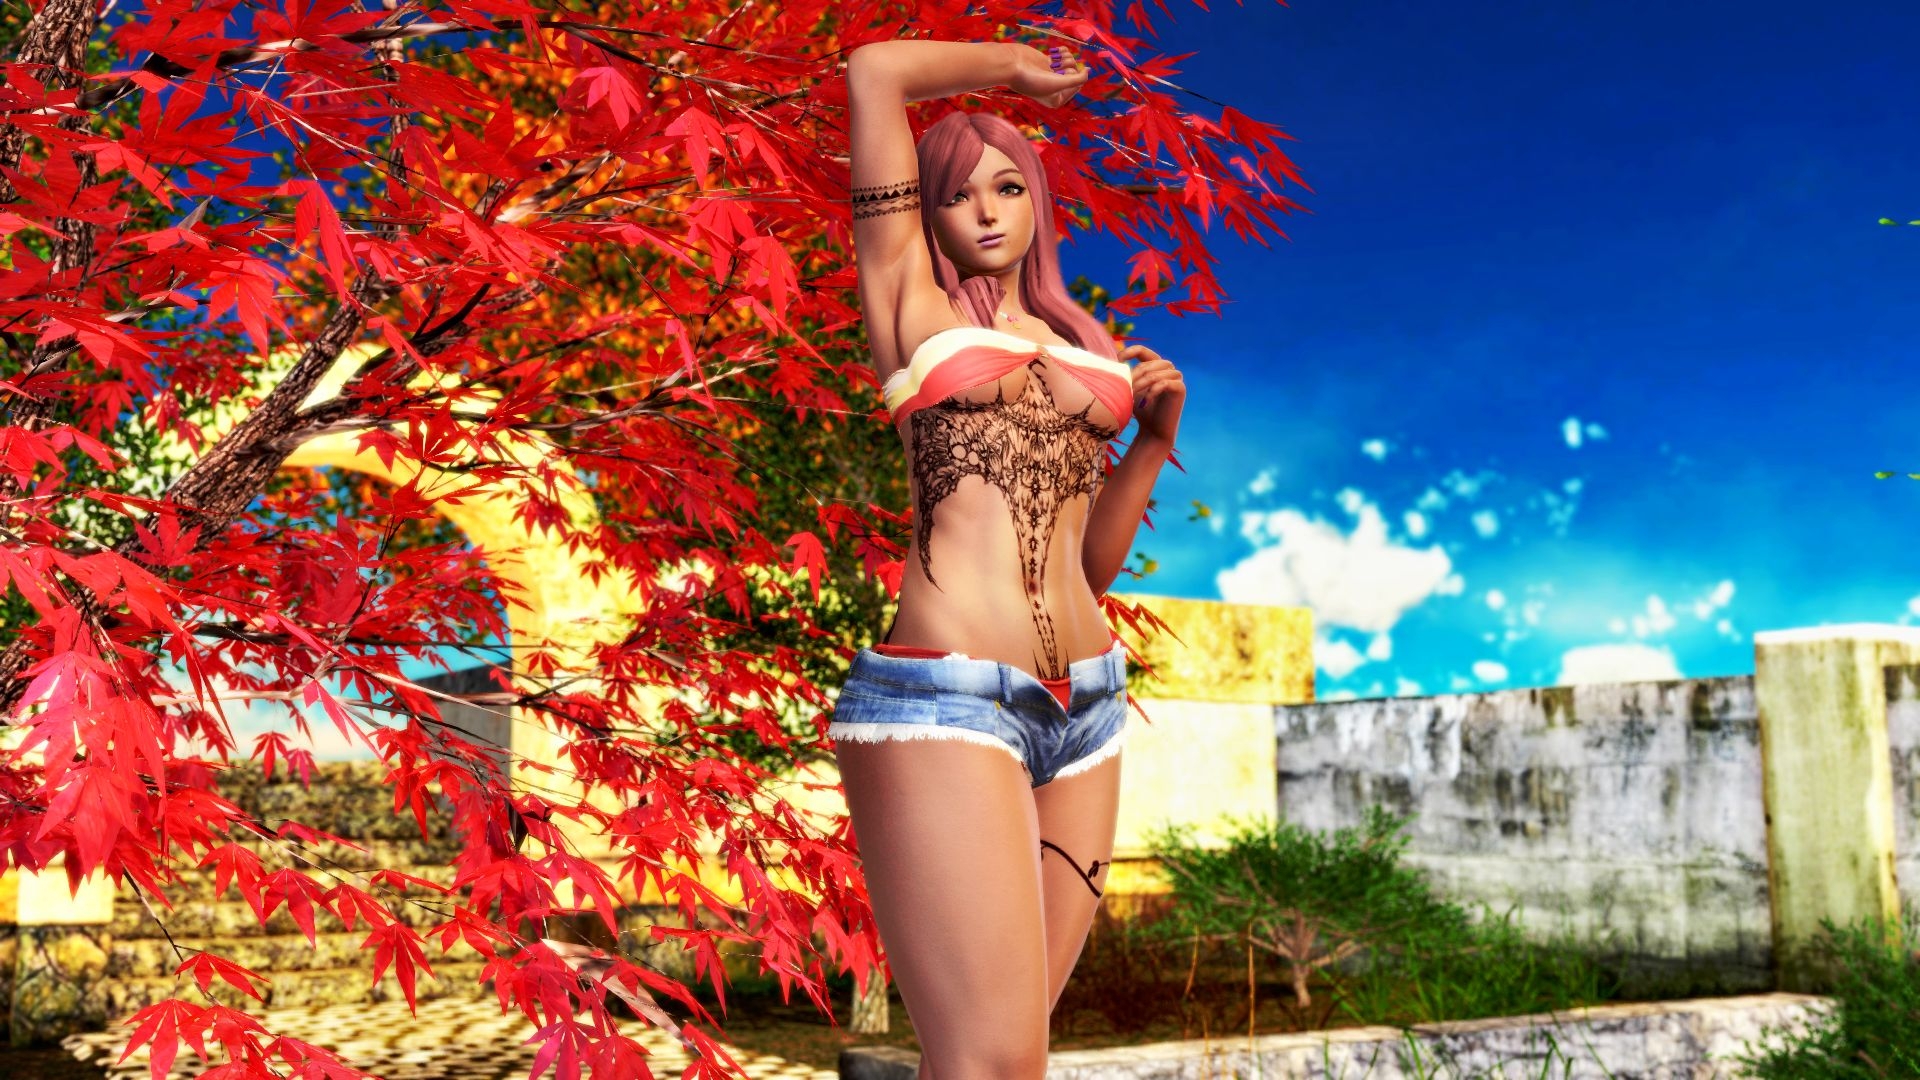 Tiffany At The Park Honey Select Stripper Endowed Adult Games Nsfw Games 3d Porn Porn Game Thicc Thick Thighs Tattoo Tattoos 5